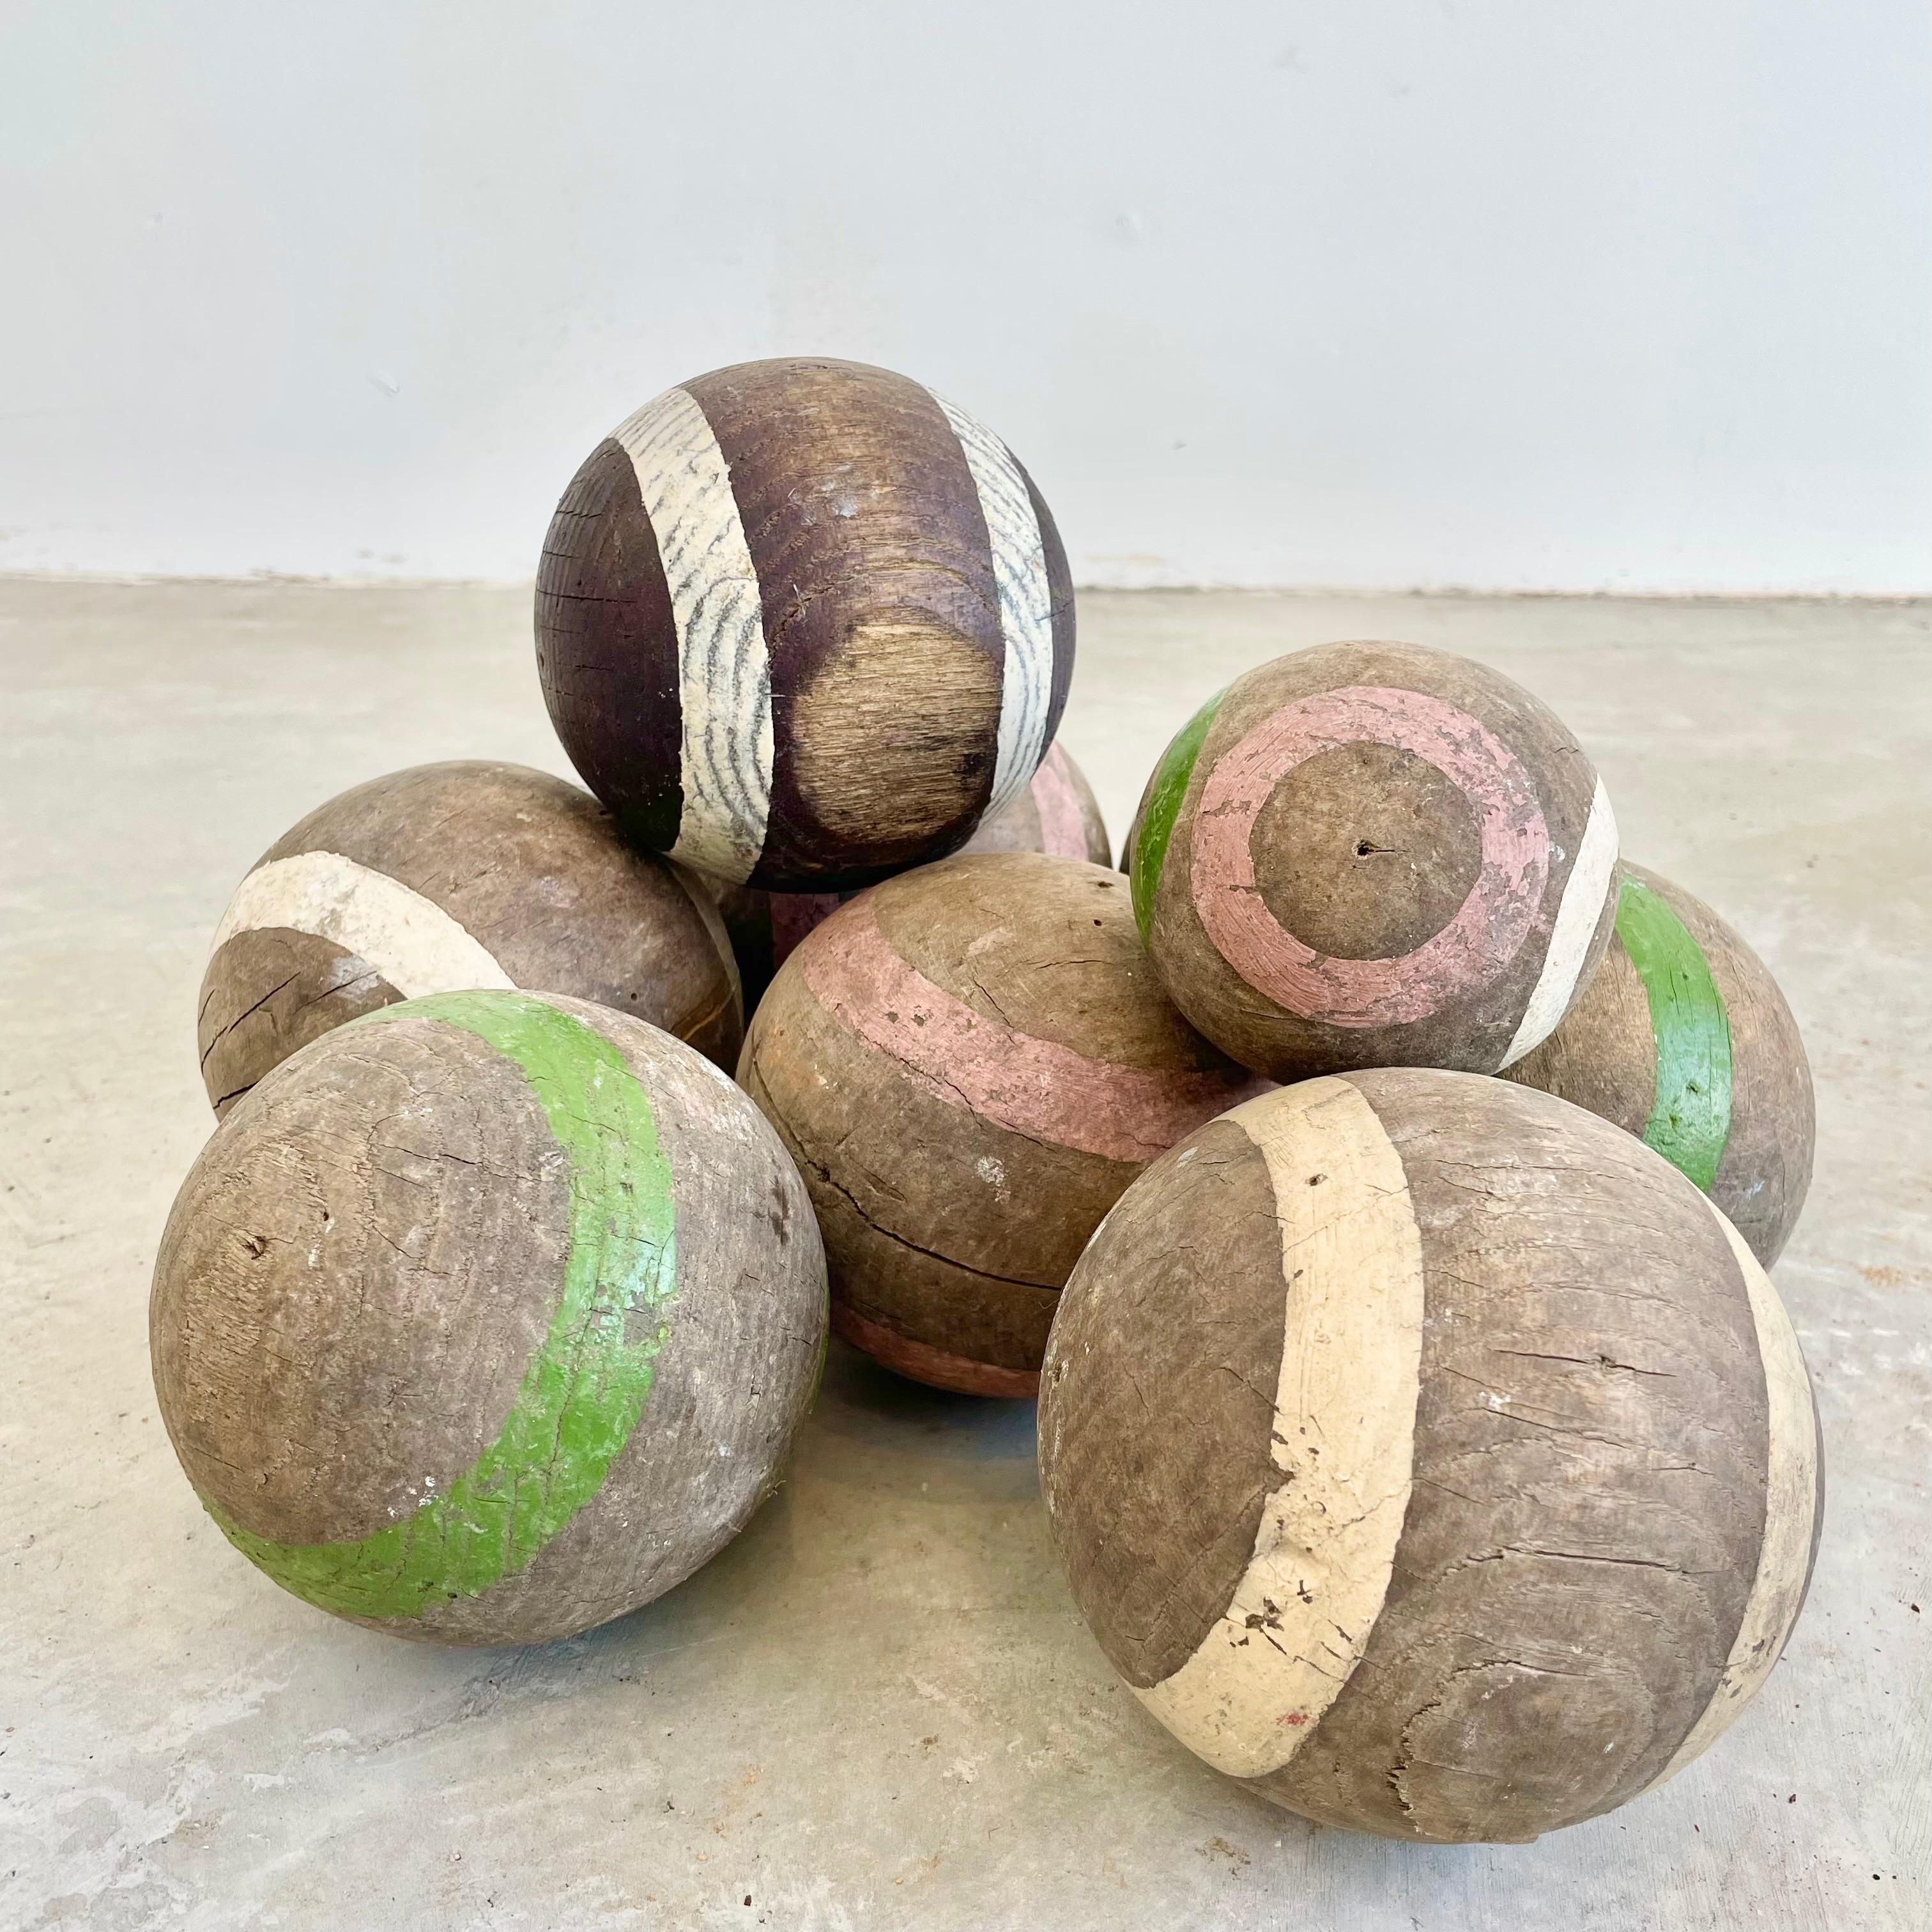 Hand made wooden bocce balls with hand painted green, white and pink rings. Various patinas and colors give the set amazing and depth. Each ball is made of a dense solid wood. Would go beautifully in a bowl as a centerpiece on a coffee table or